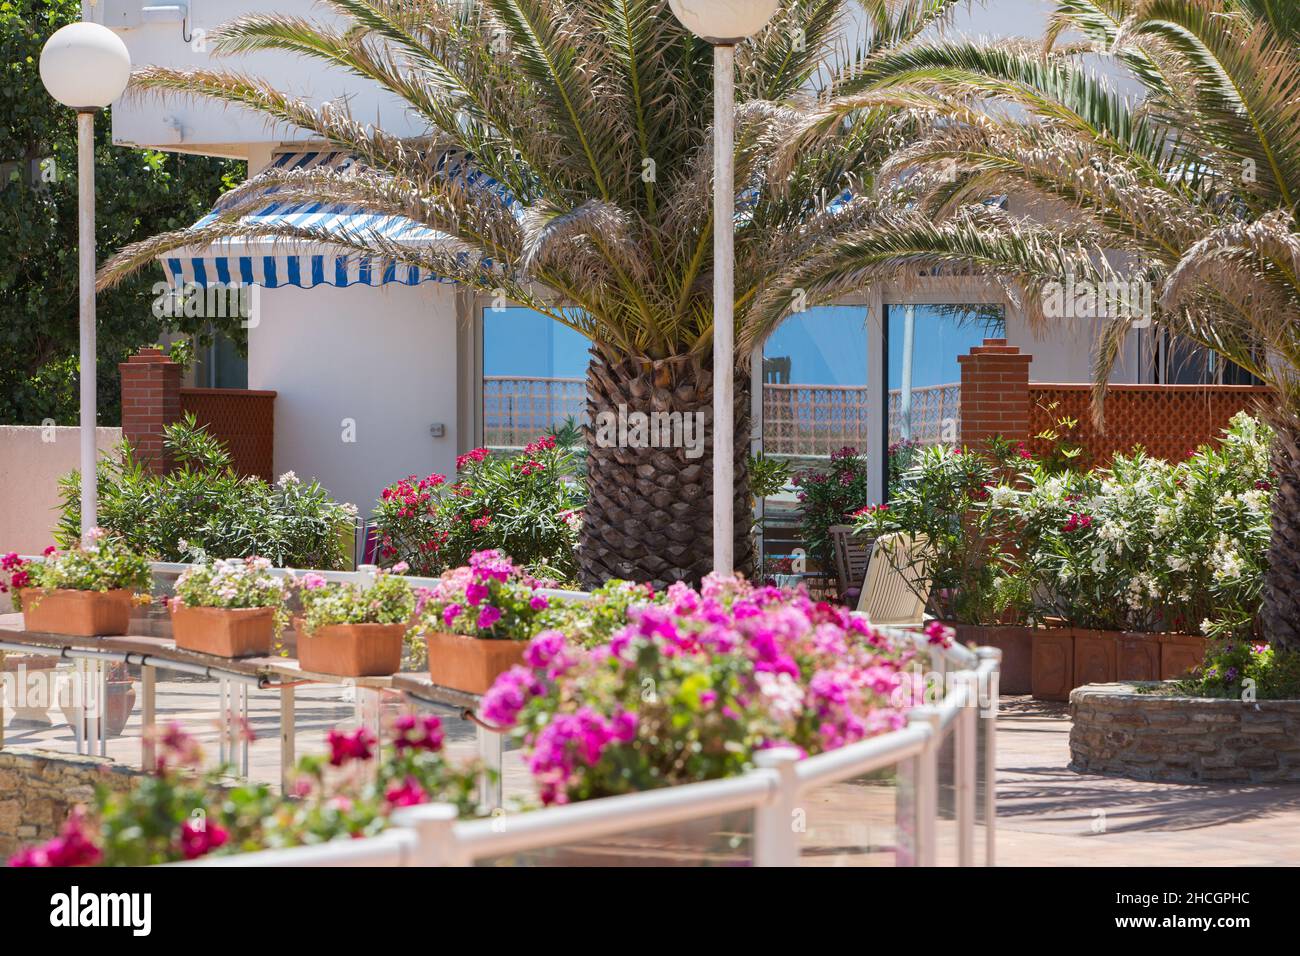 A floral display at the Lydia Playa apartment block in le barcares, South of France Stock Photo